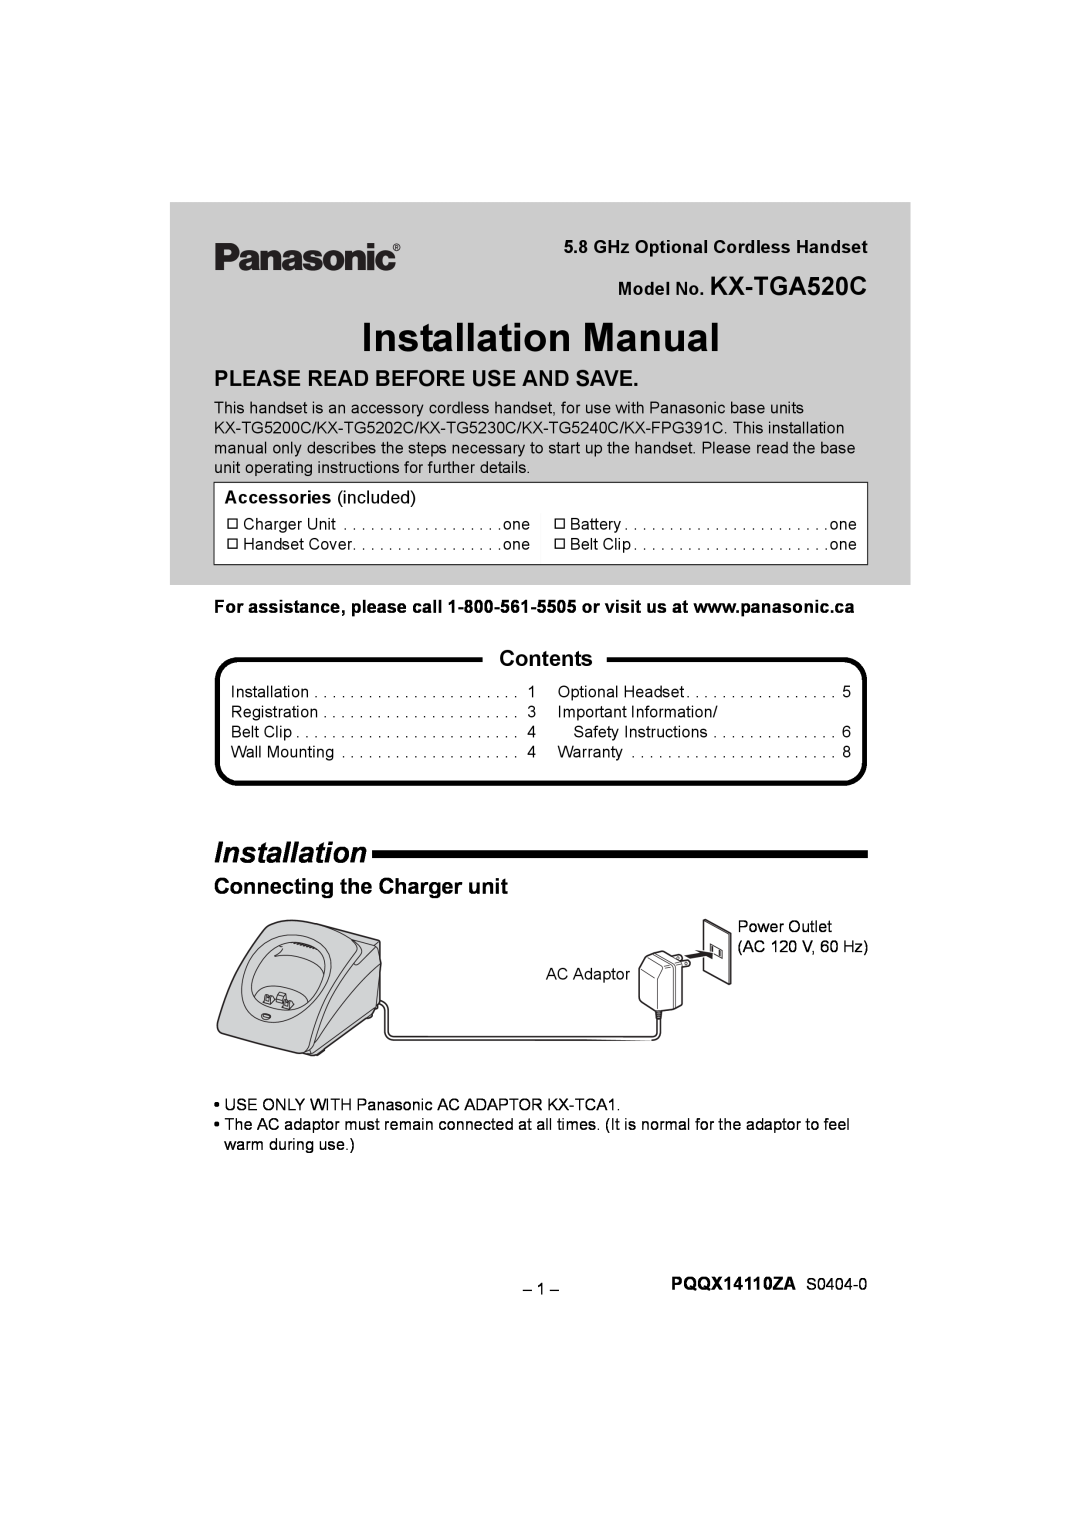 Panasonic installation manual Installation, Please Read Before Use And Save, Contents, Model No. KX-TGA520C 